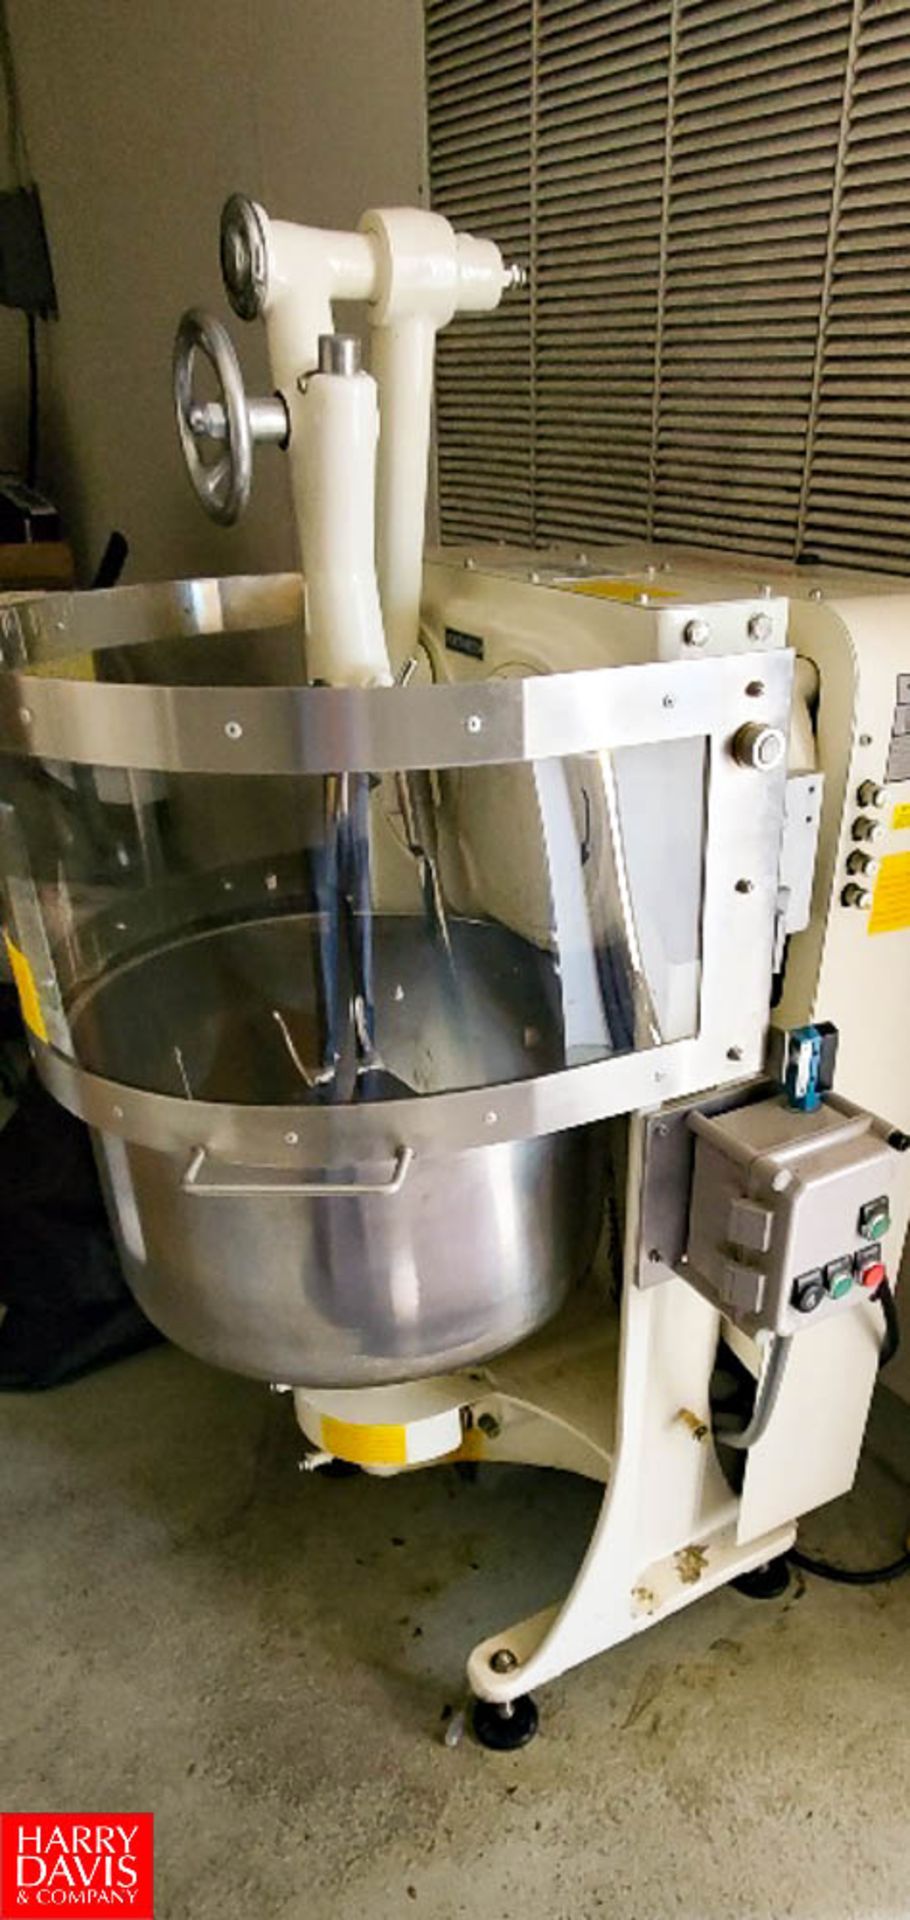 Excellent Artofex Double Arm Mixer, Model PF-4 Low Hour, R&D, SN: 271015 - Rigging Fee: $150 - Image 3 of 6